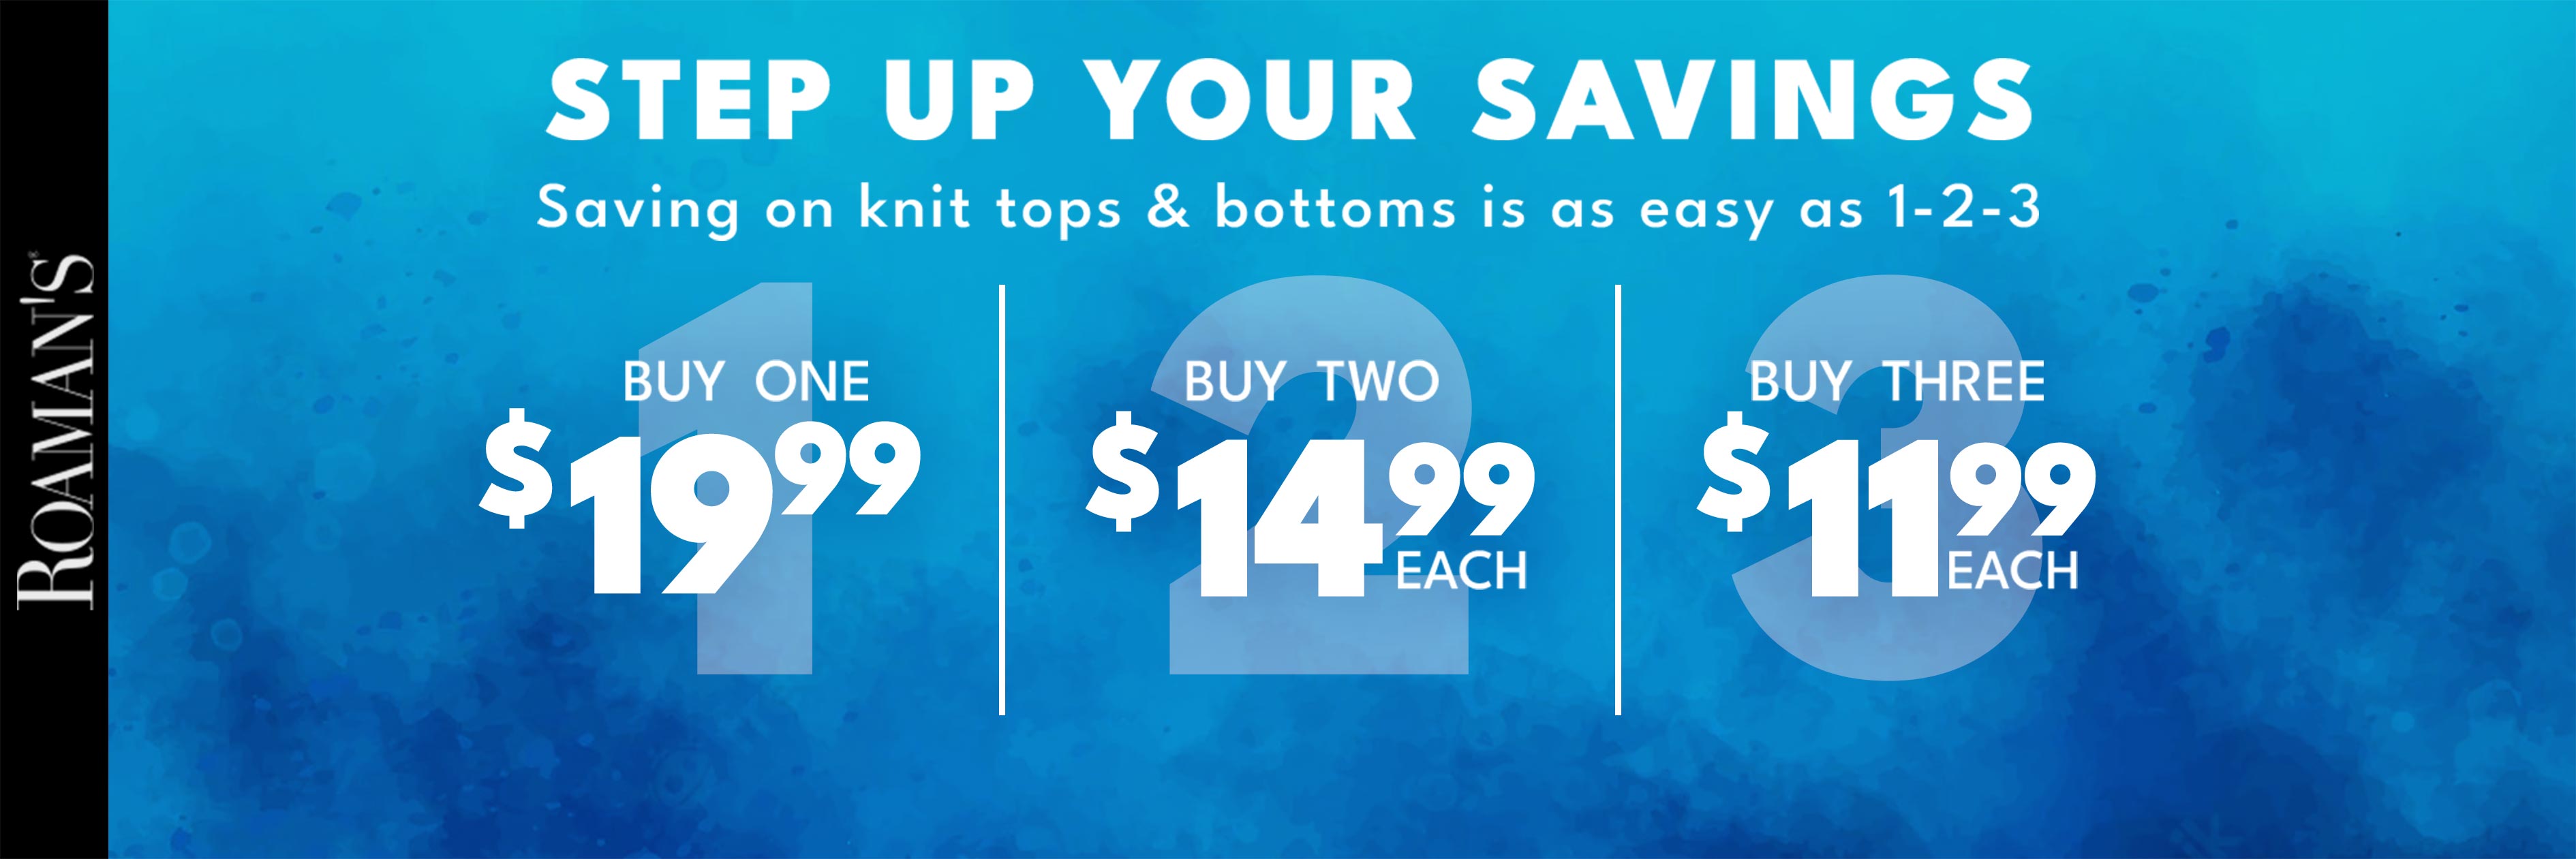 Step up your savings saving on knit tops & bottoms is as easy as 1-2-3 buy one $19.9 buy two $14.99 each buy three $11.99 each shop now